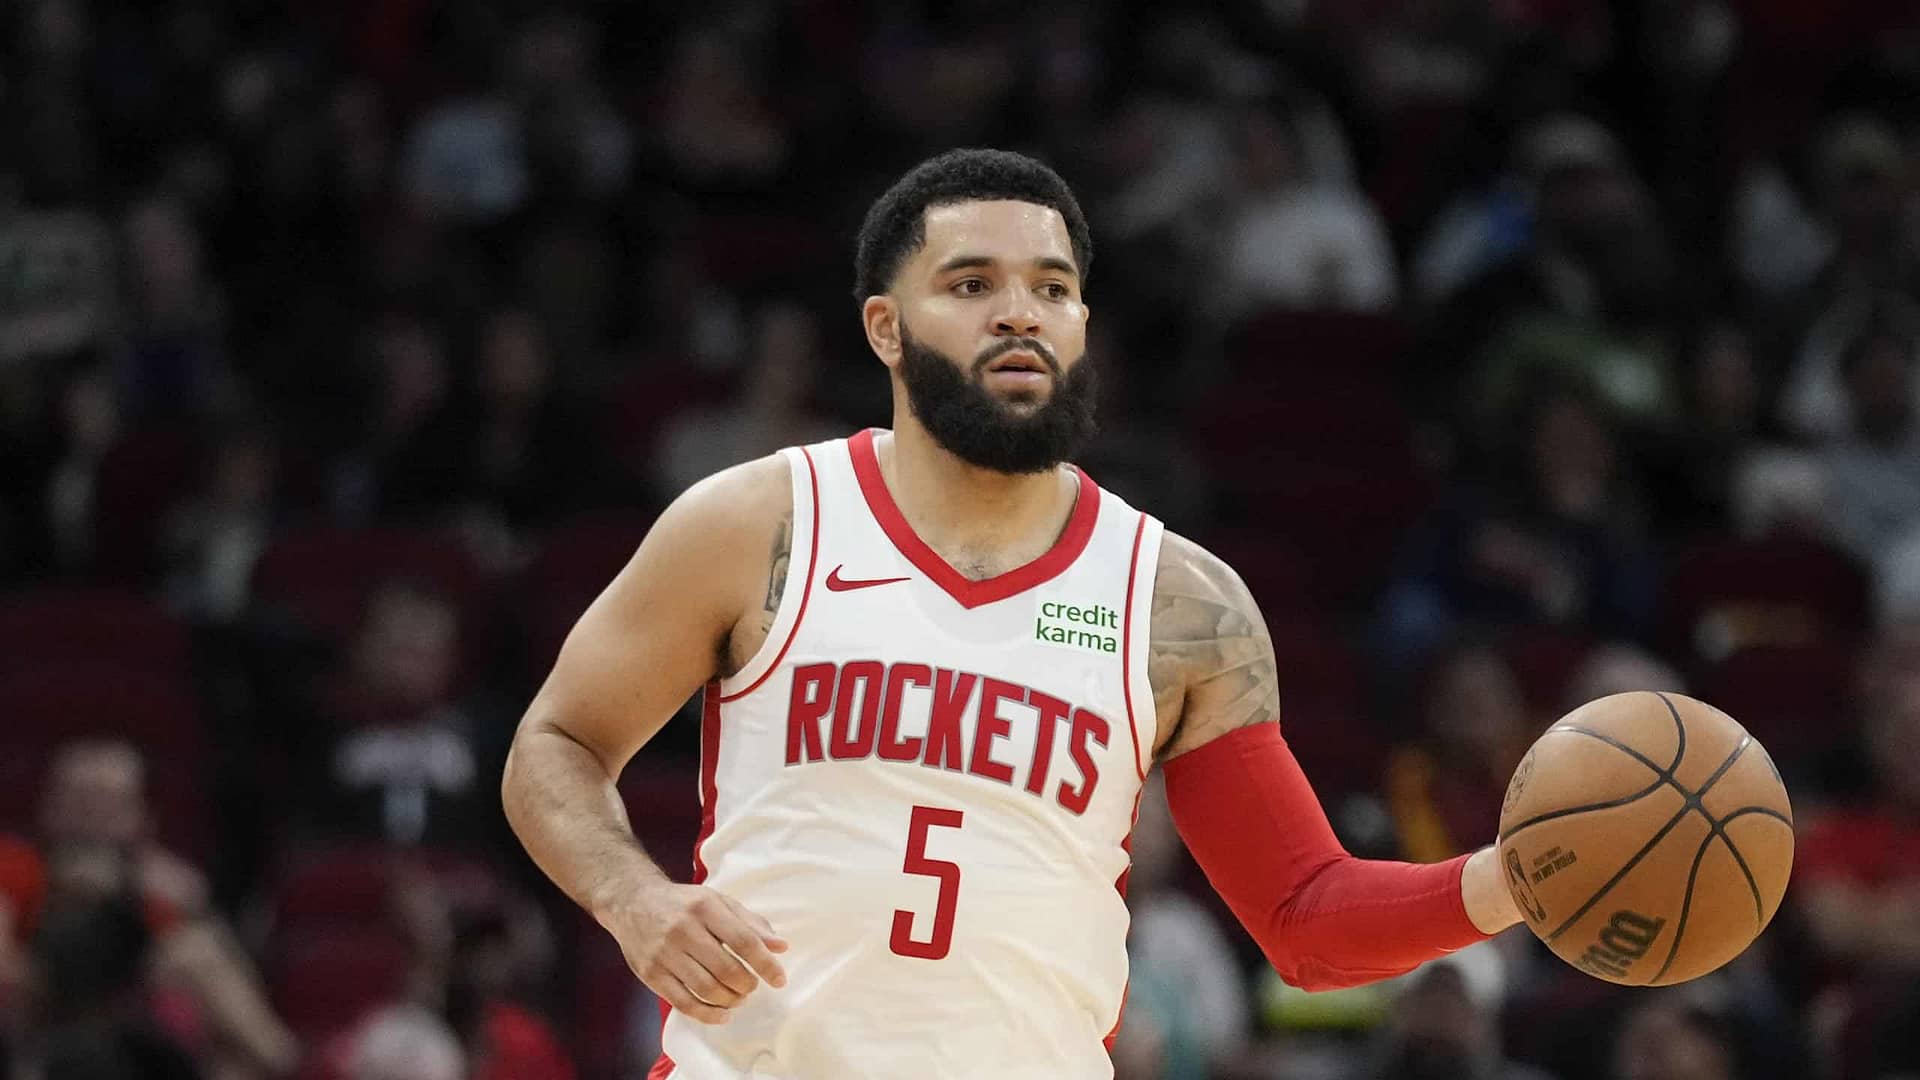 Our NBA picks today for Thursday, March 14 include expert bets for players like Fred VanVleet, who takes on the Washington Wizards...